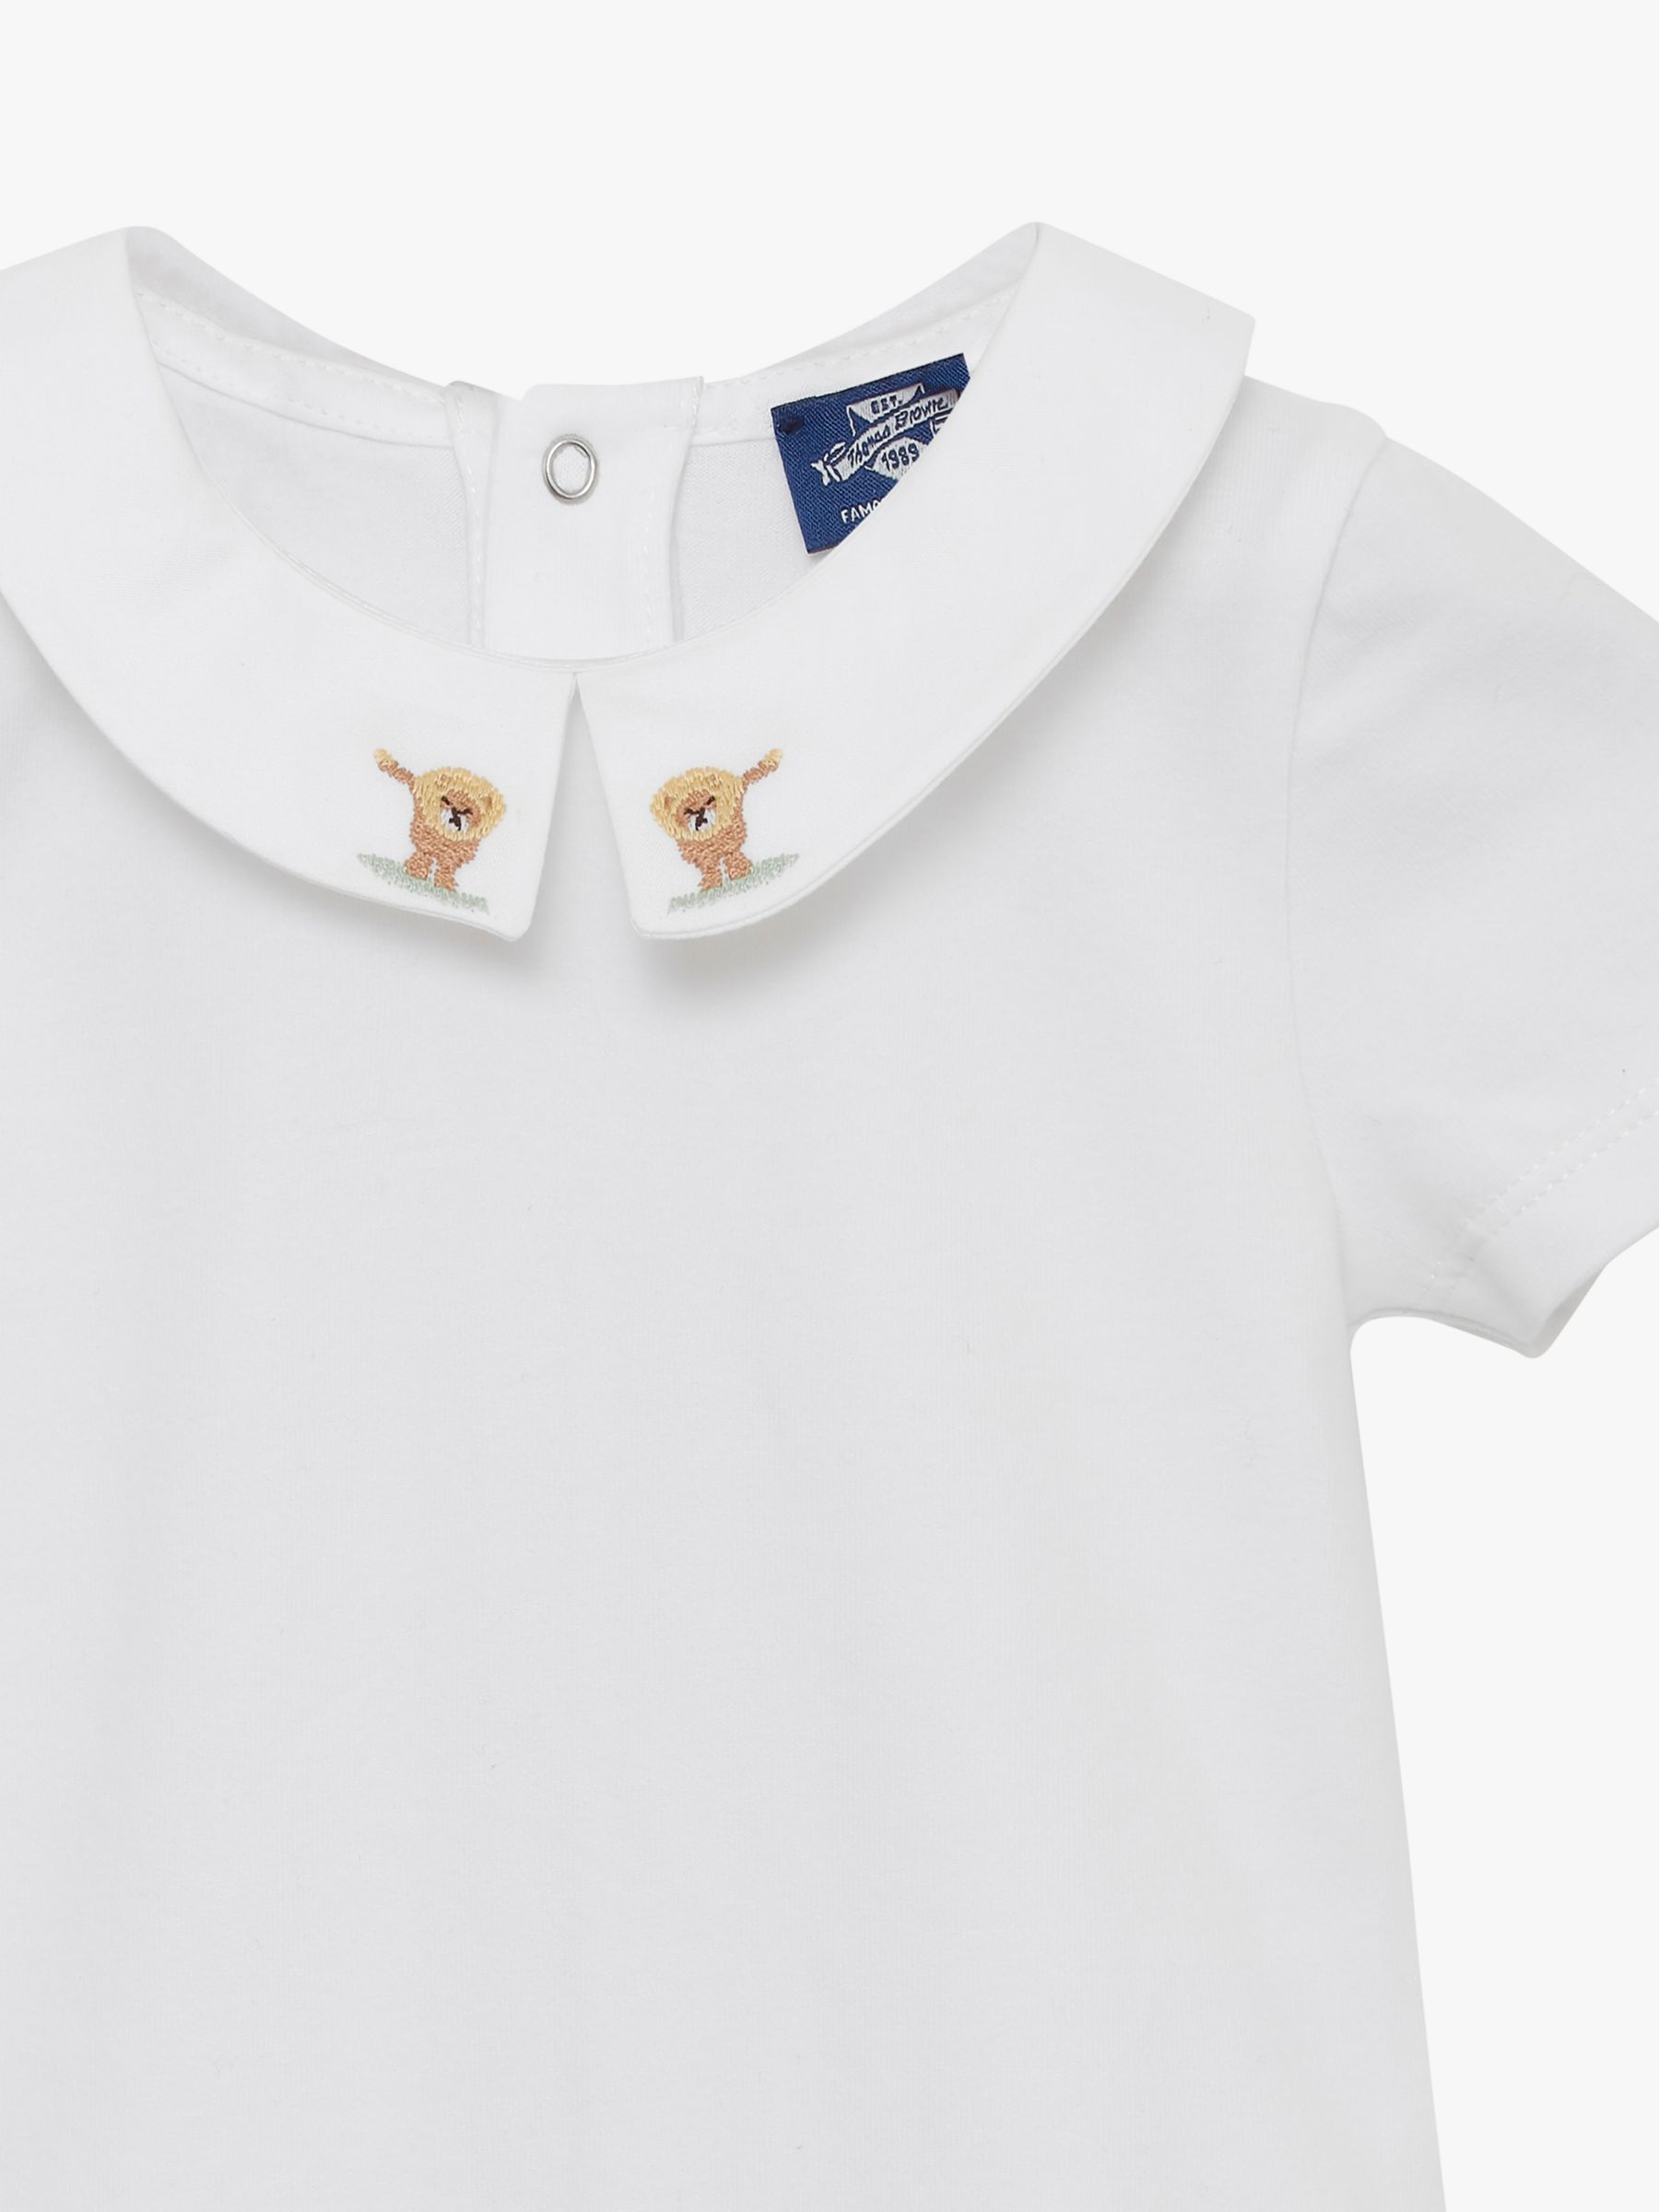 Buy Trotters Thomas Brown Baby Monty Lion Jersey Bodysuit, White Online at johnlewis.com